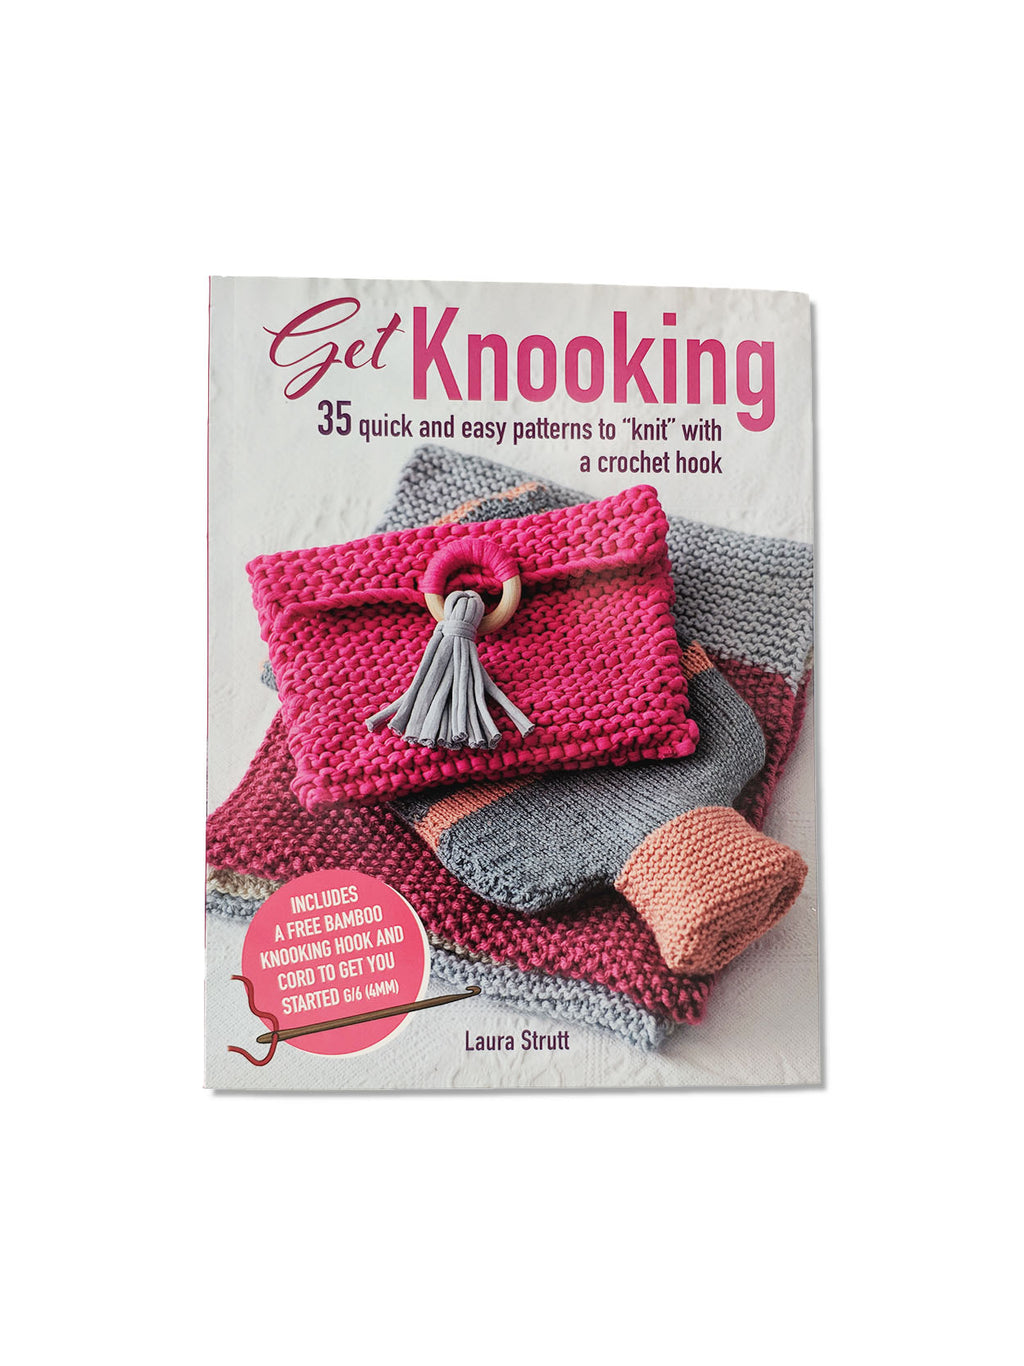 Get Knooking : 35 Quick and Easy Patterns to "Knit" with a Crochet Hook